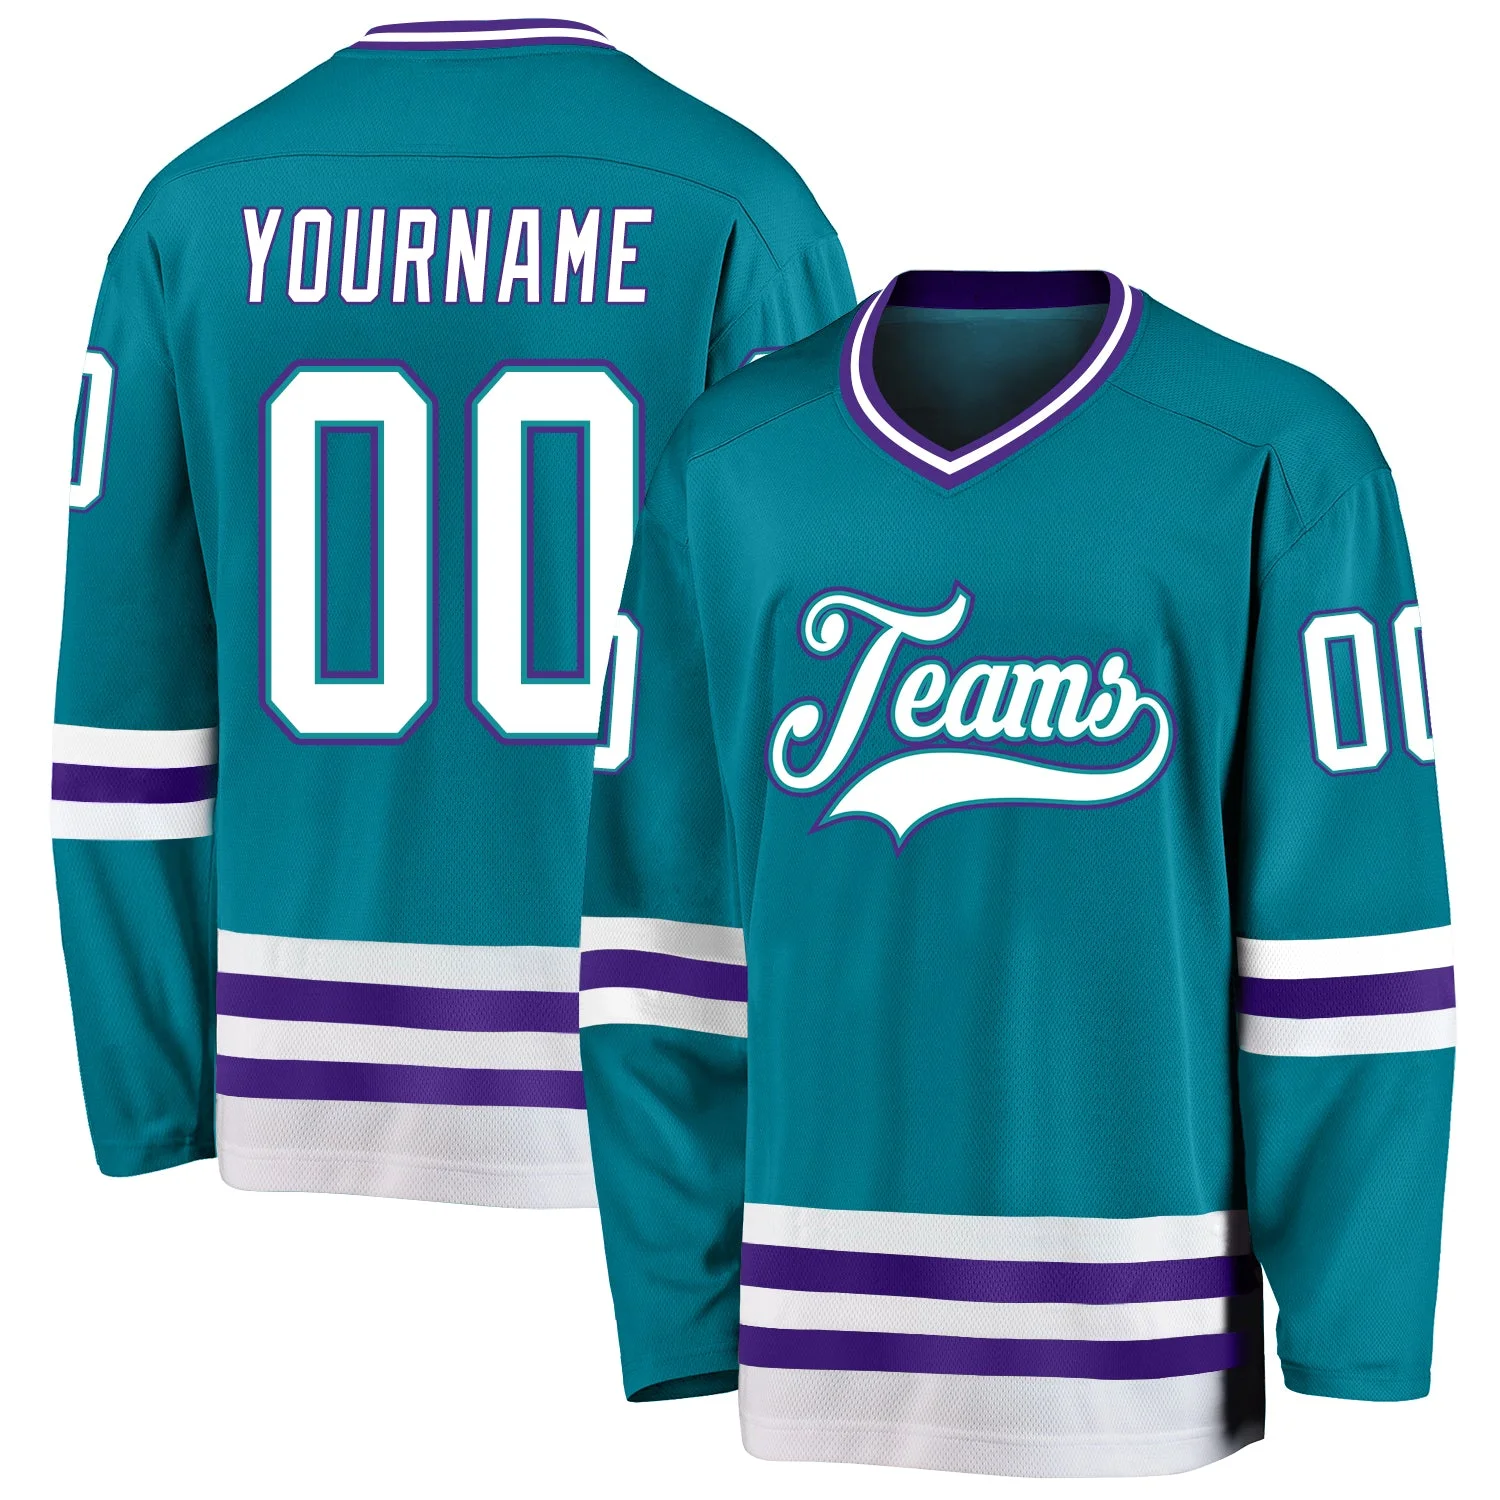 Stitched And Print Teal White-purple Hockey Jersey Custom